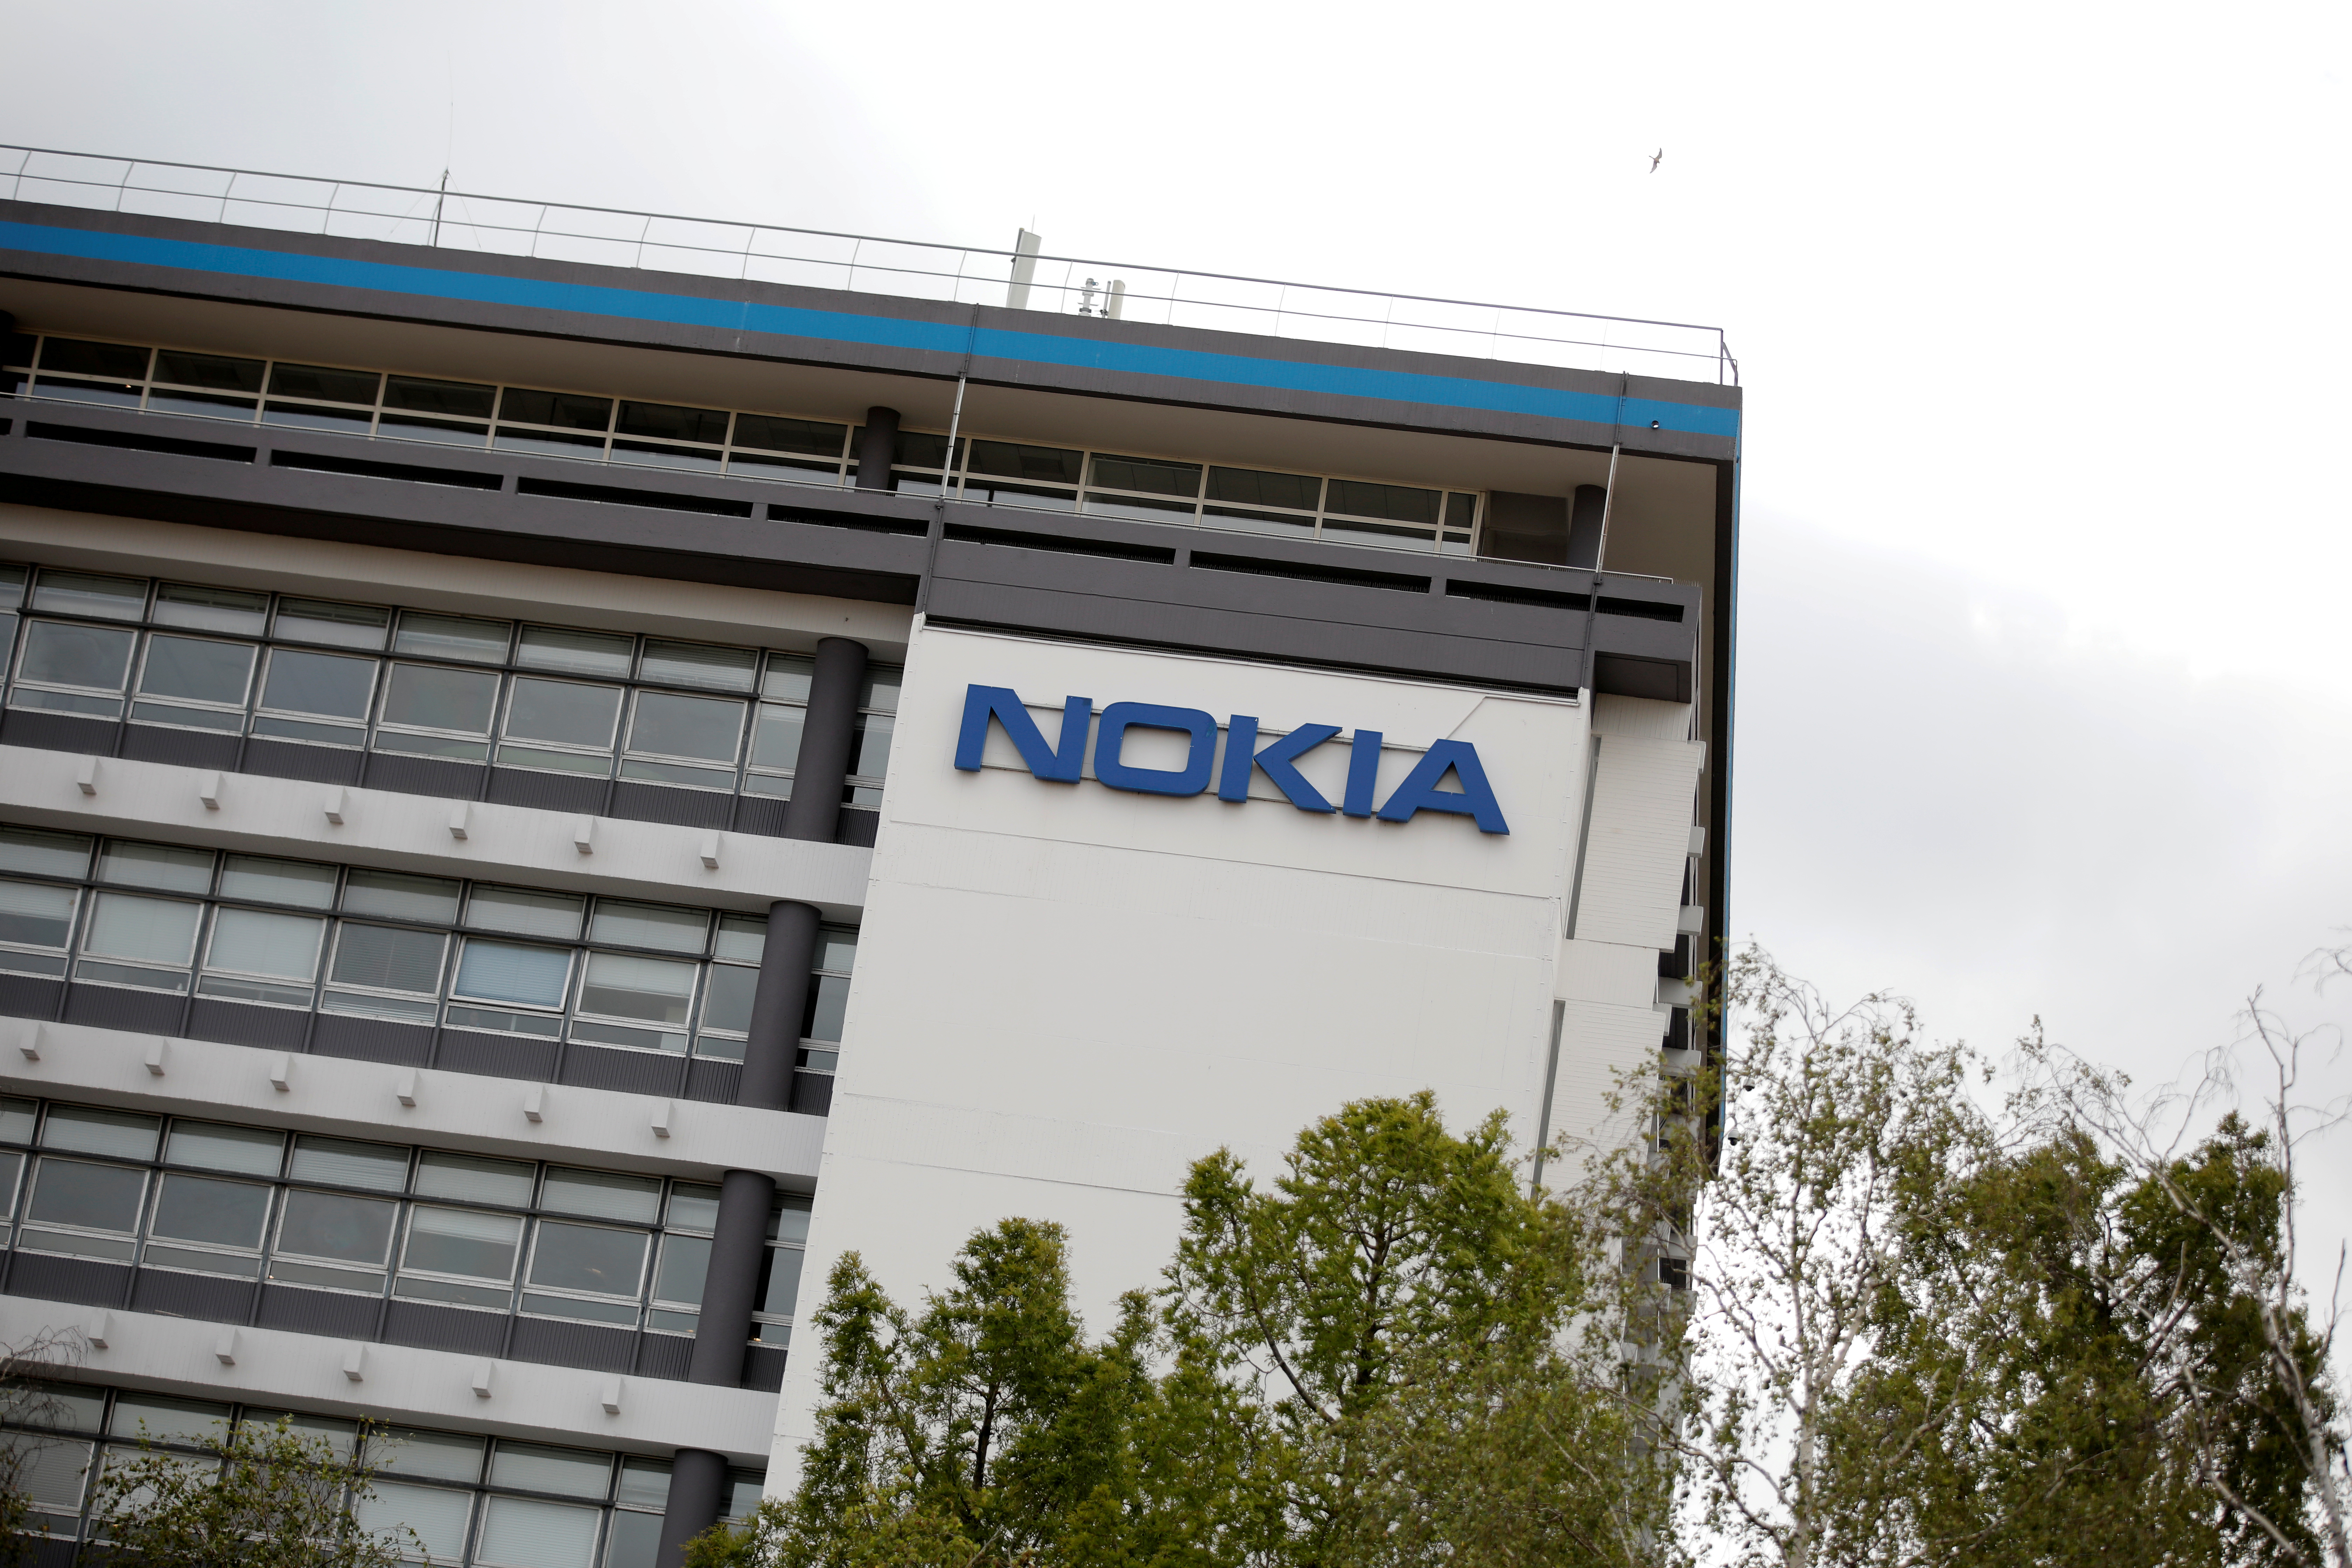 Workers protest over job cuts at Nokia in France